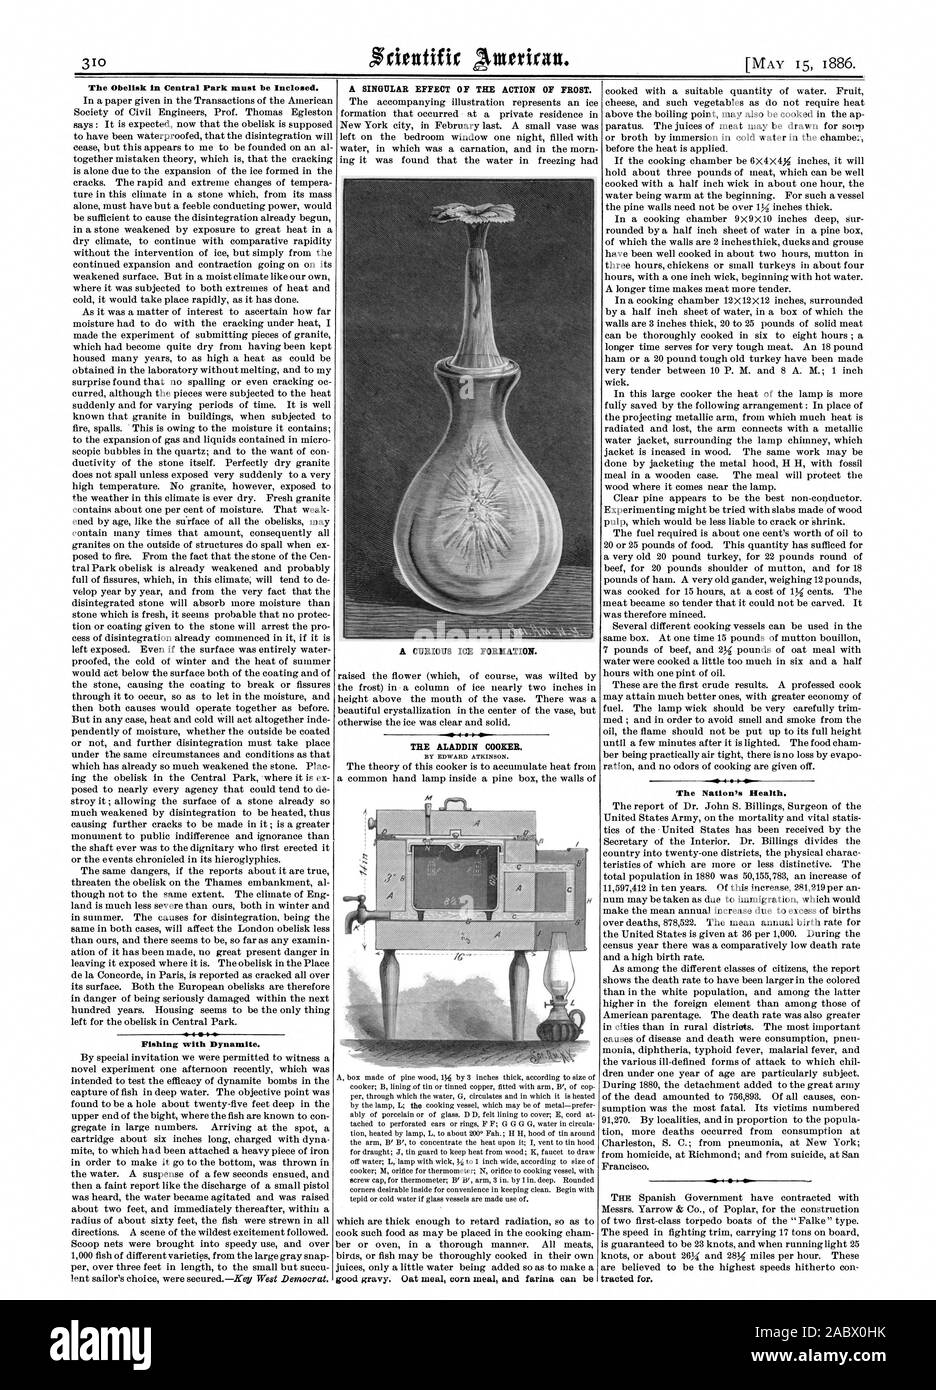 The Obelisk in Central Park must be Inclosed. Fishing with Dynamite. A SINGULAR EFFECT OF THE ACTION OF FROST. THE ALADDIN COOKER. The Nation's Health. A CURIOUS ICE FORMATION., scientific american, 1886-05-15 Stock Photo